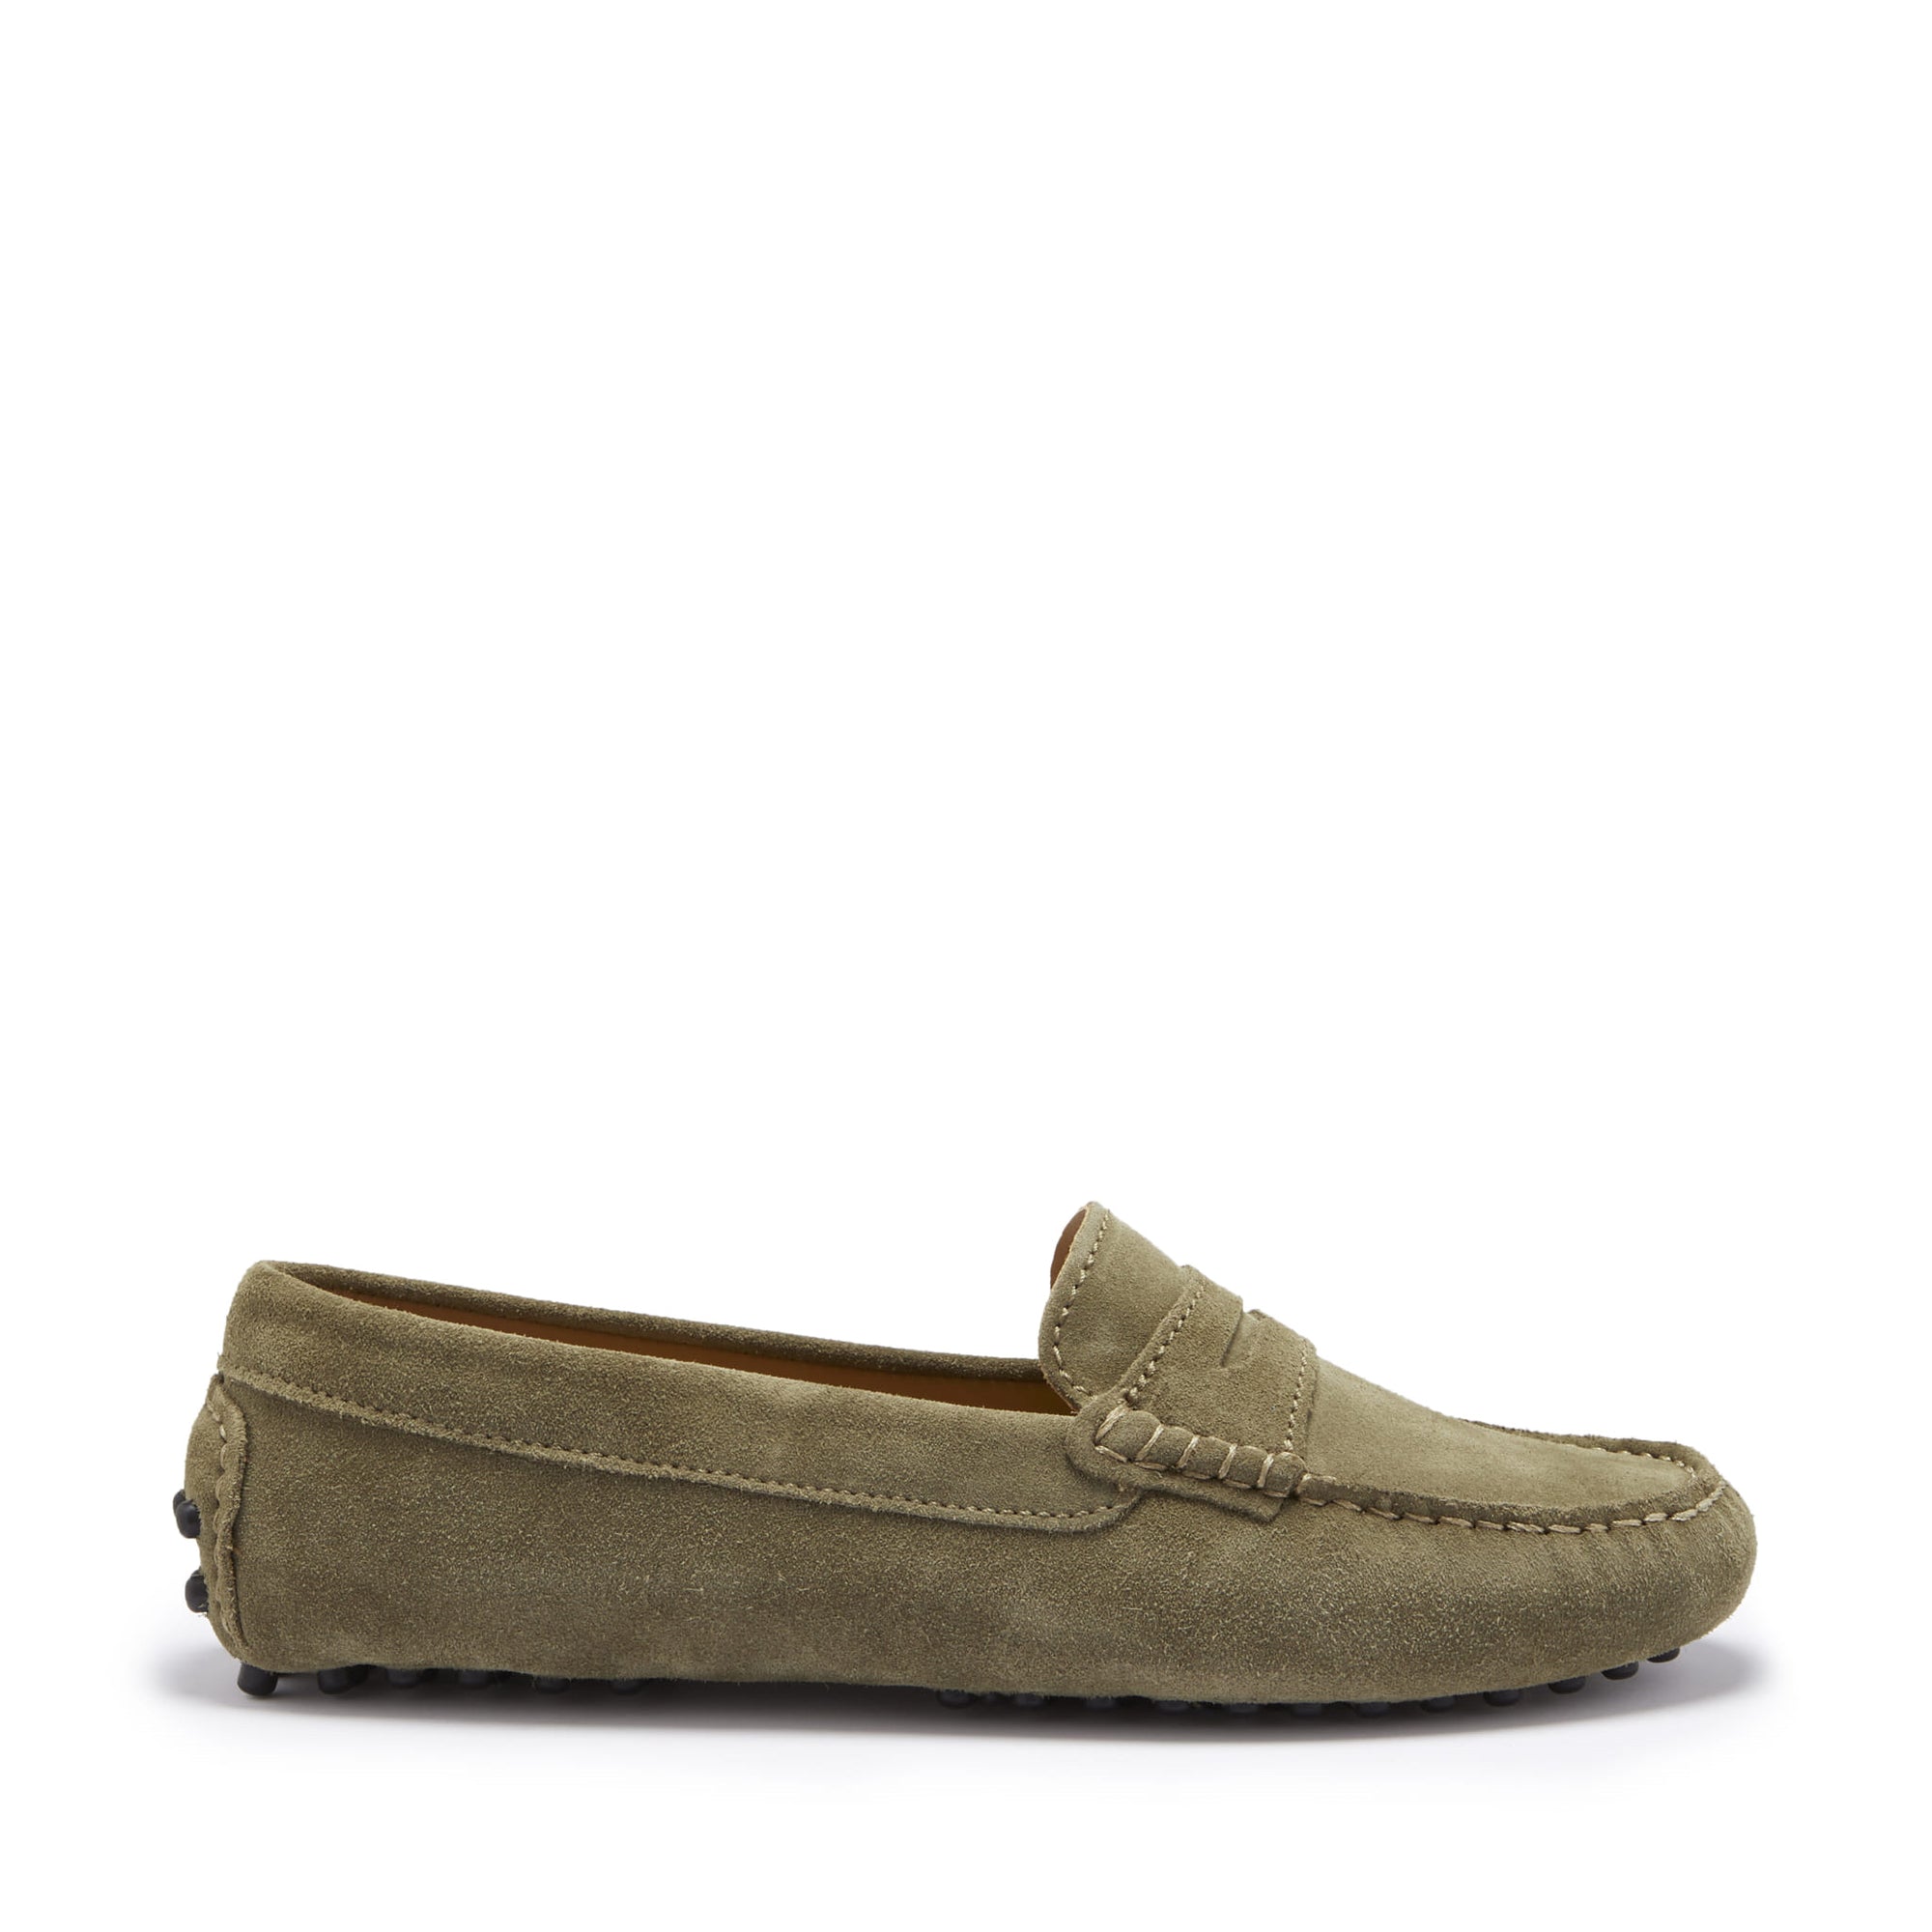 Women's Penny Driving Loafers, truffle suede